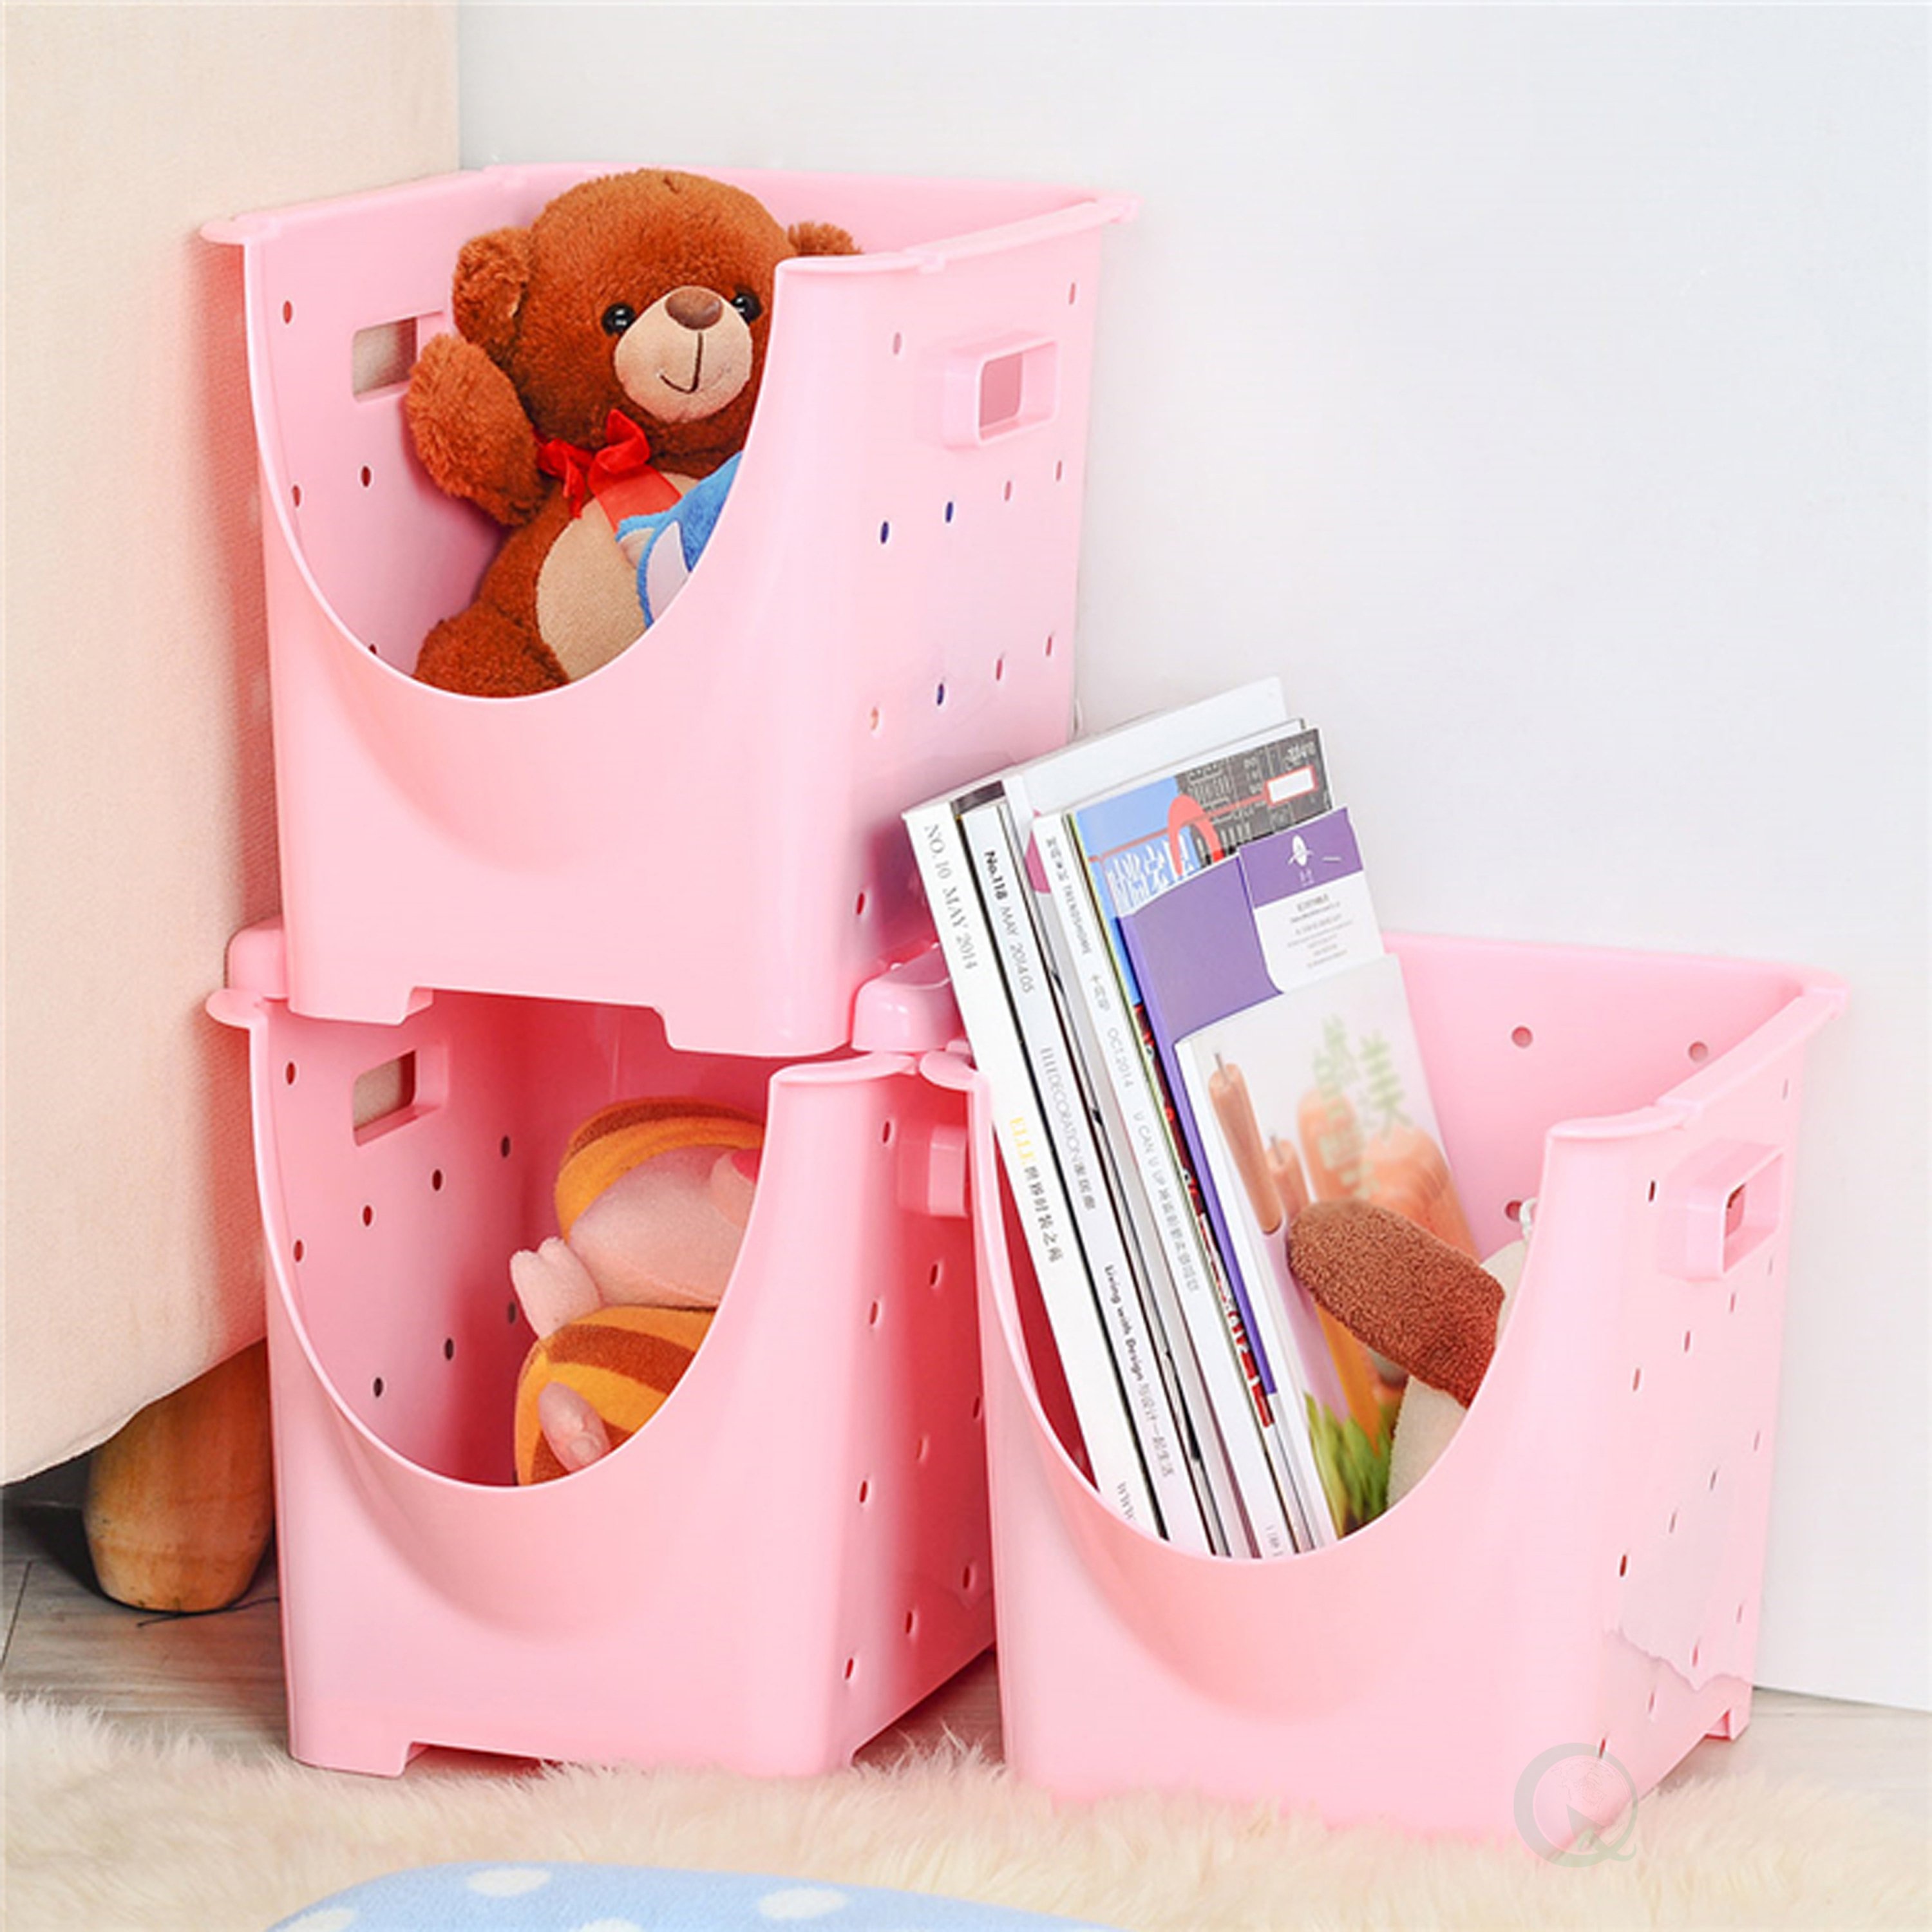 Stackable Plastic Storage Container - Set Of 3 Pink